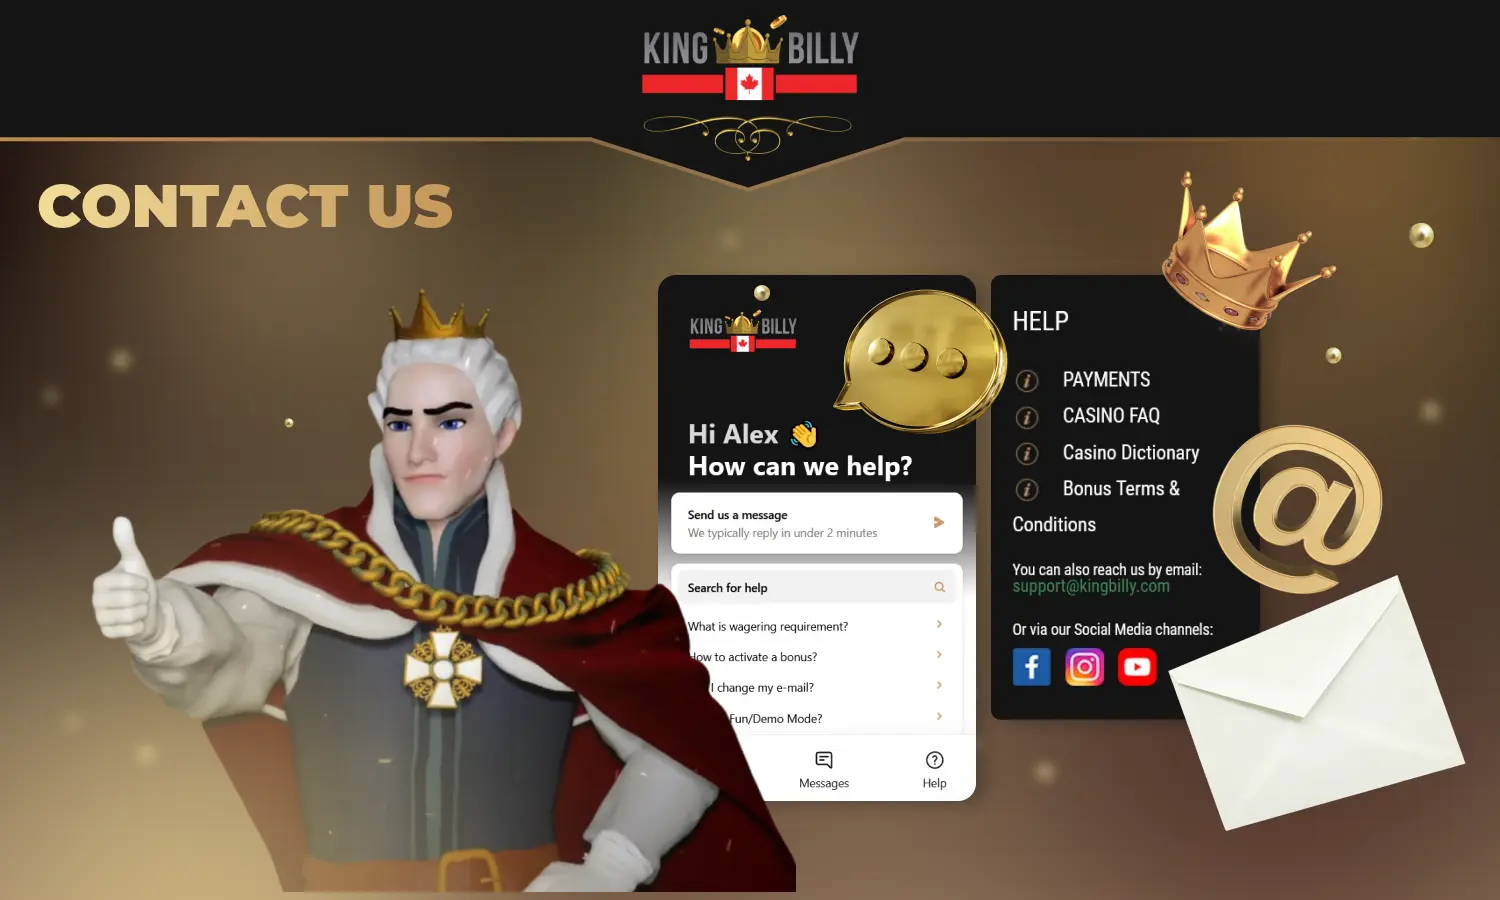 If Canadian players have any questions or difficulties, they can contact King Billy support team